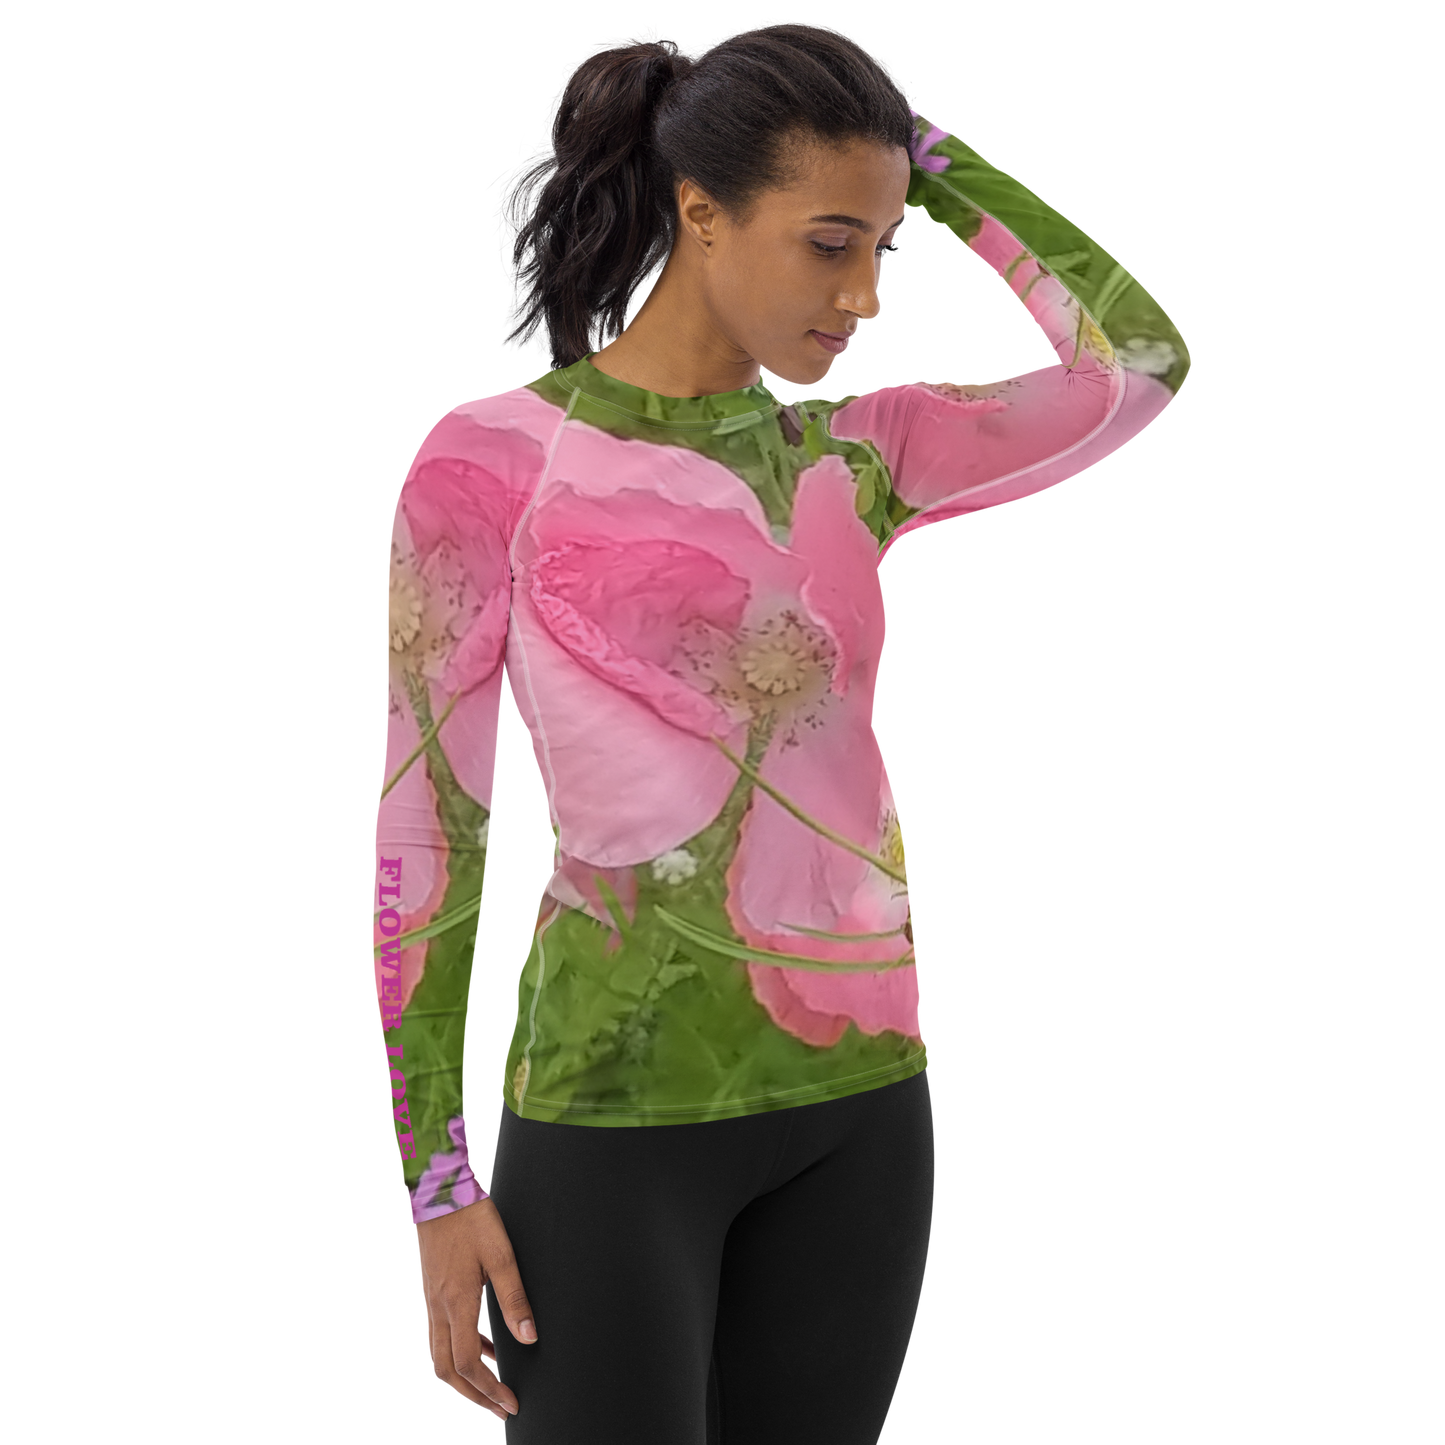 The FLOWER LOVE Collection - "Pretty Pink Poppies" Design Luxurious Women's Rash Guard, Sun Protective Clothing, Sports & Fitness Clothing